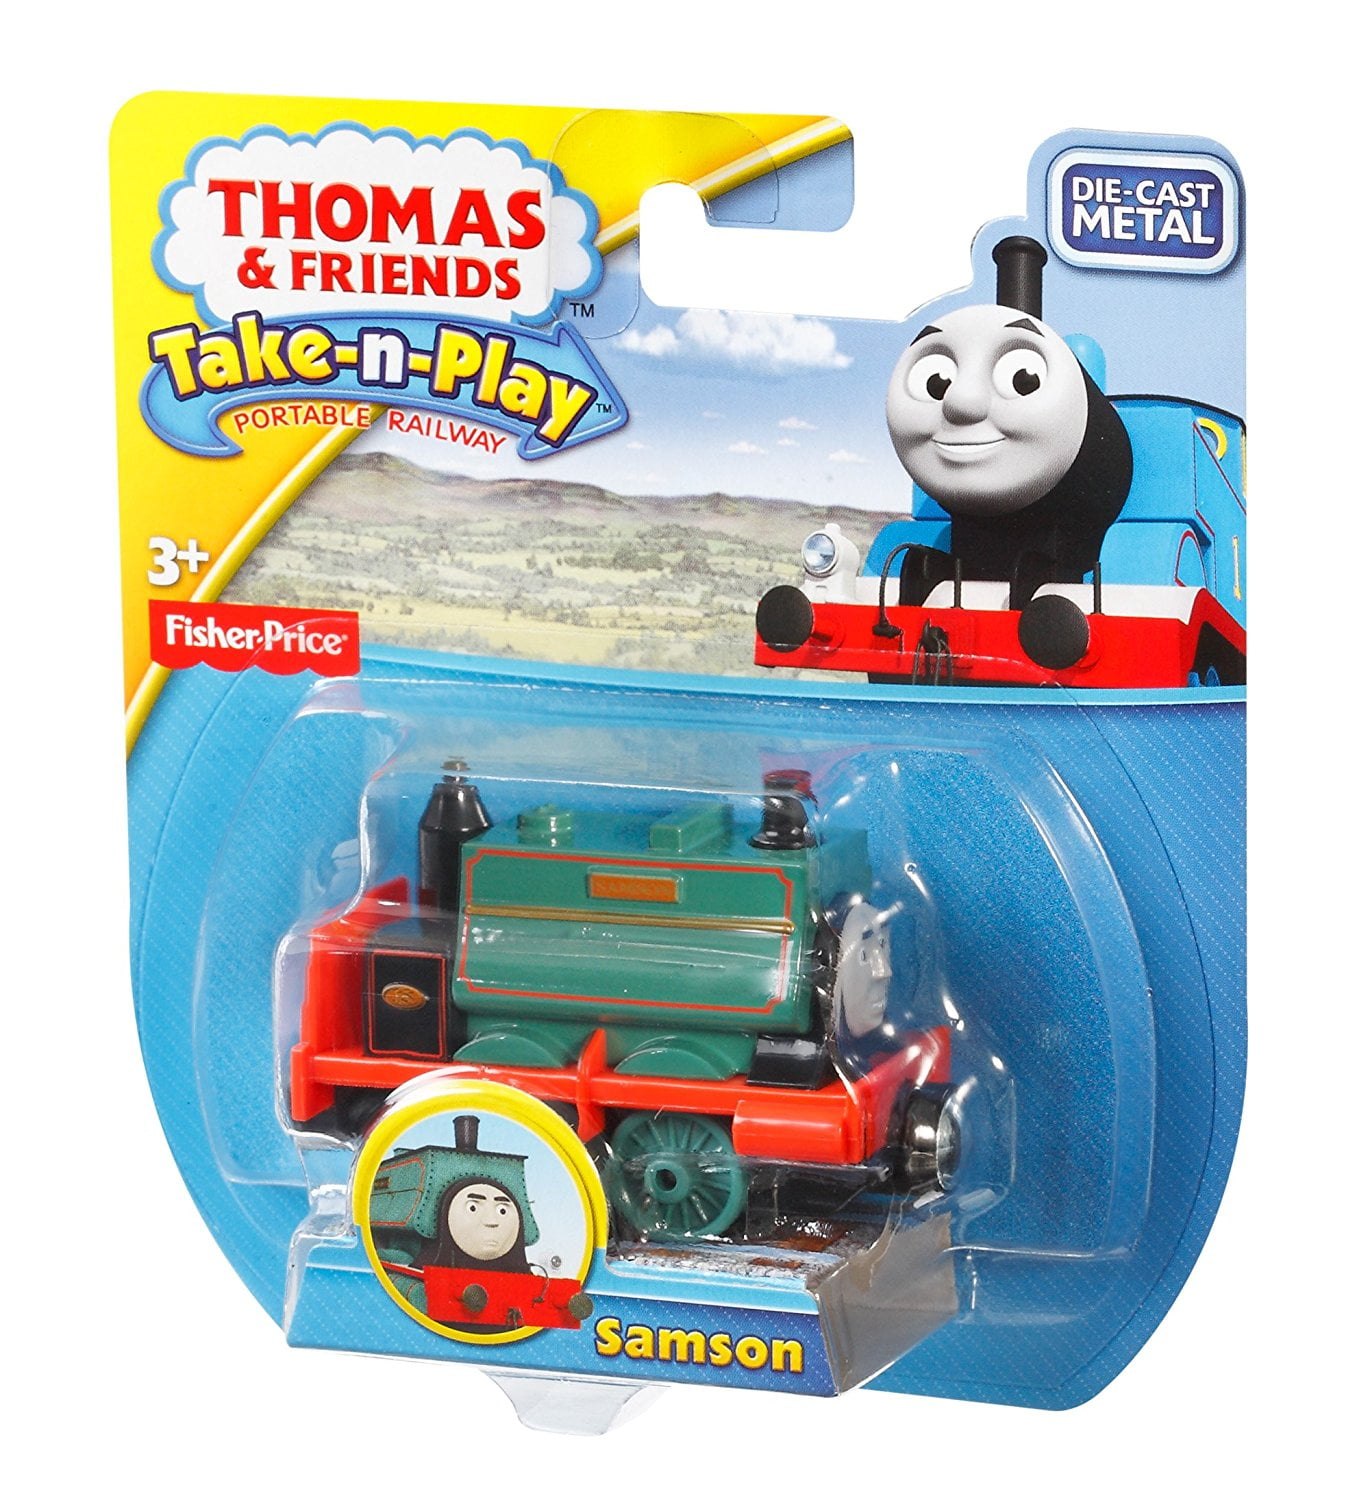 Fisher-Price Thomas The Train Samson, Sturdy collectible die-cast train engine By FisherPrice from US - Walmart.com